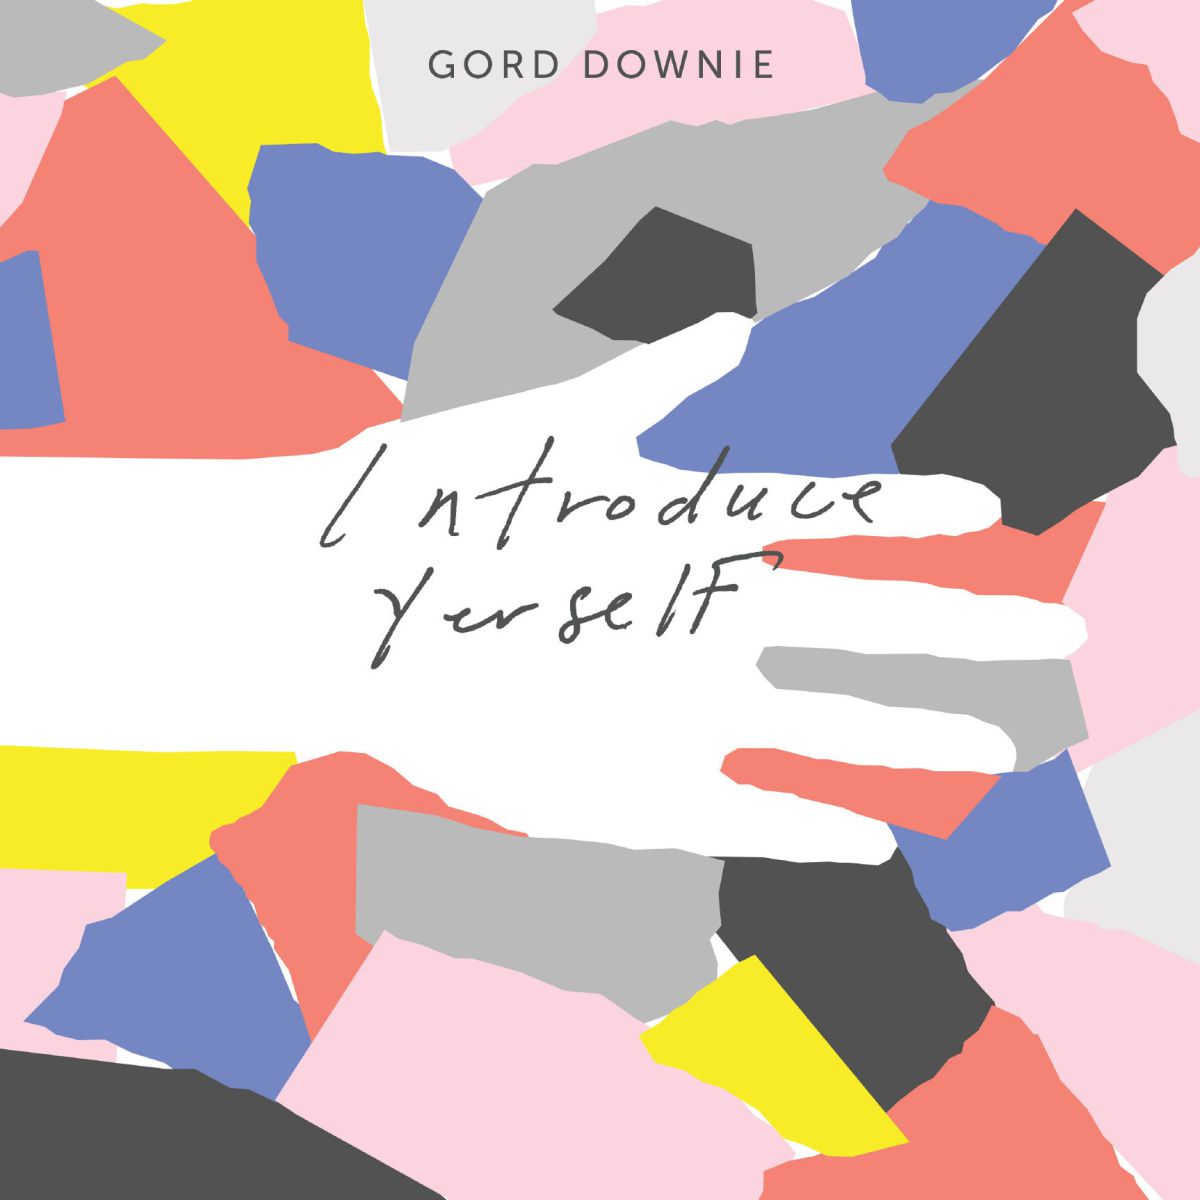 introyer Gord Downies posthumous new album, Introduce Yerself, released: Stream/download